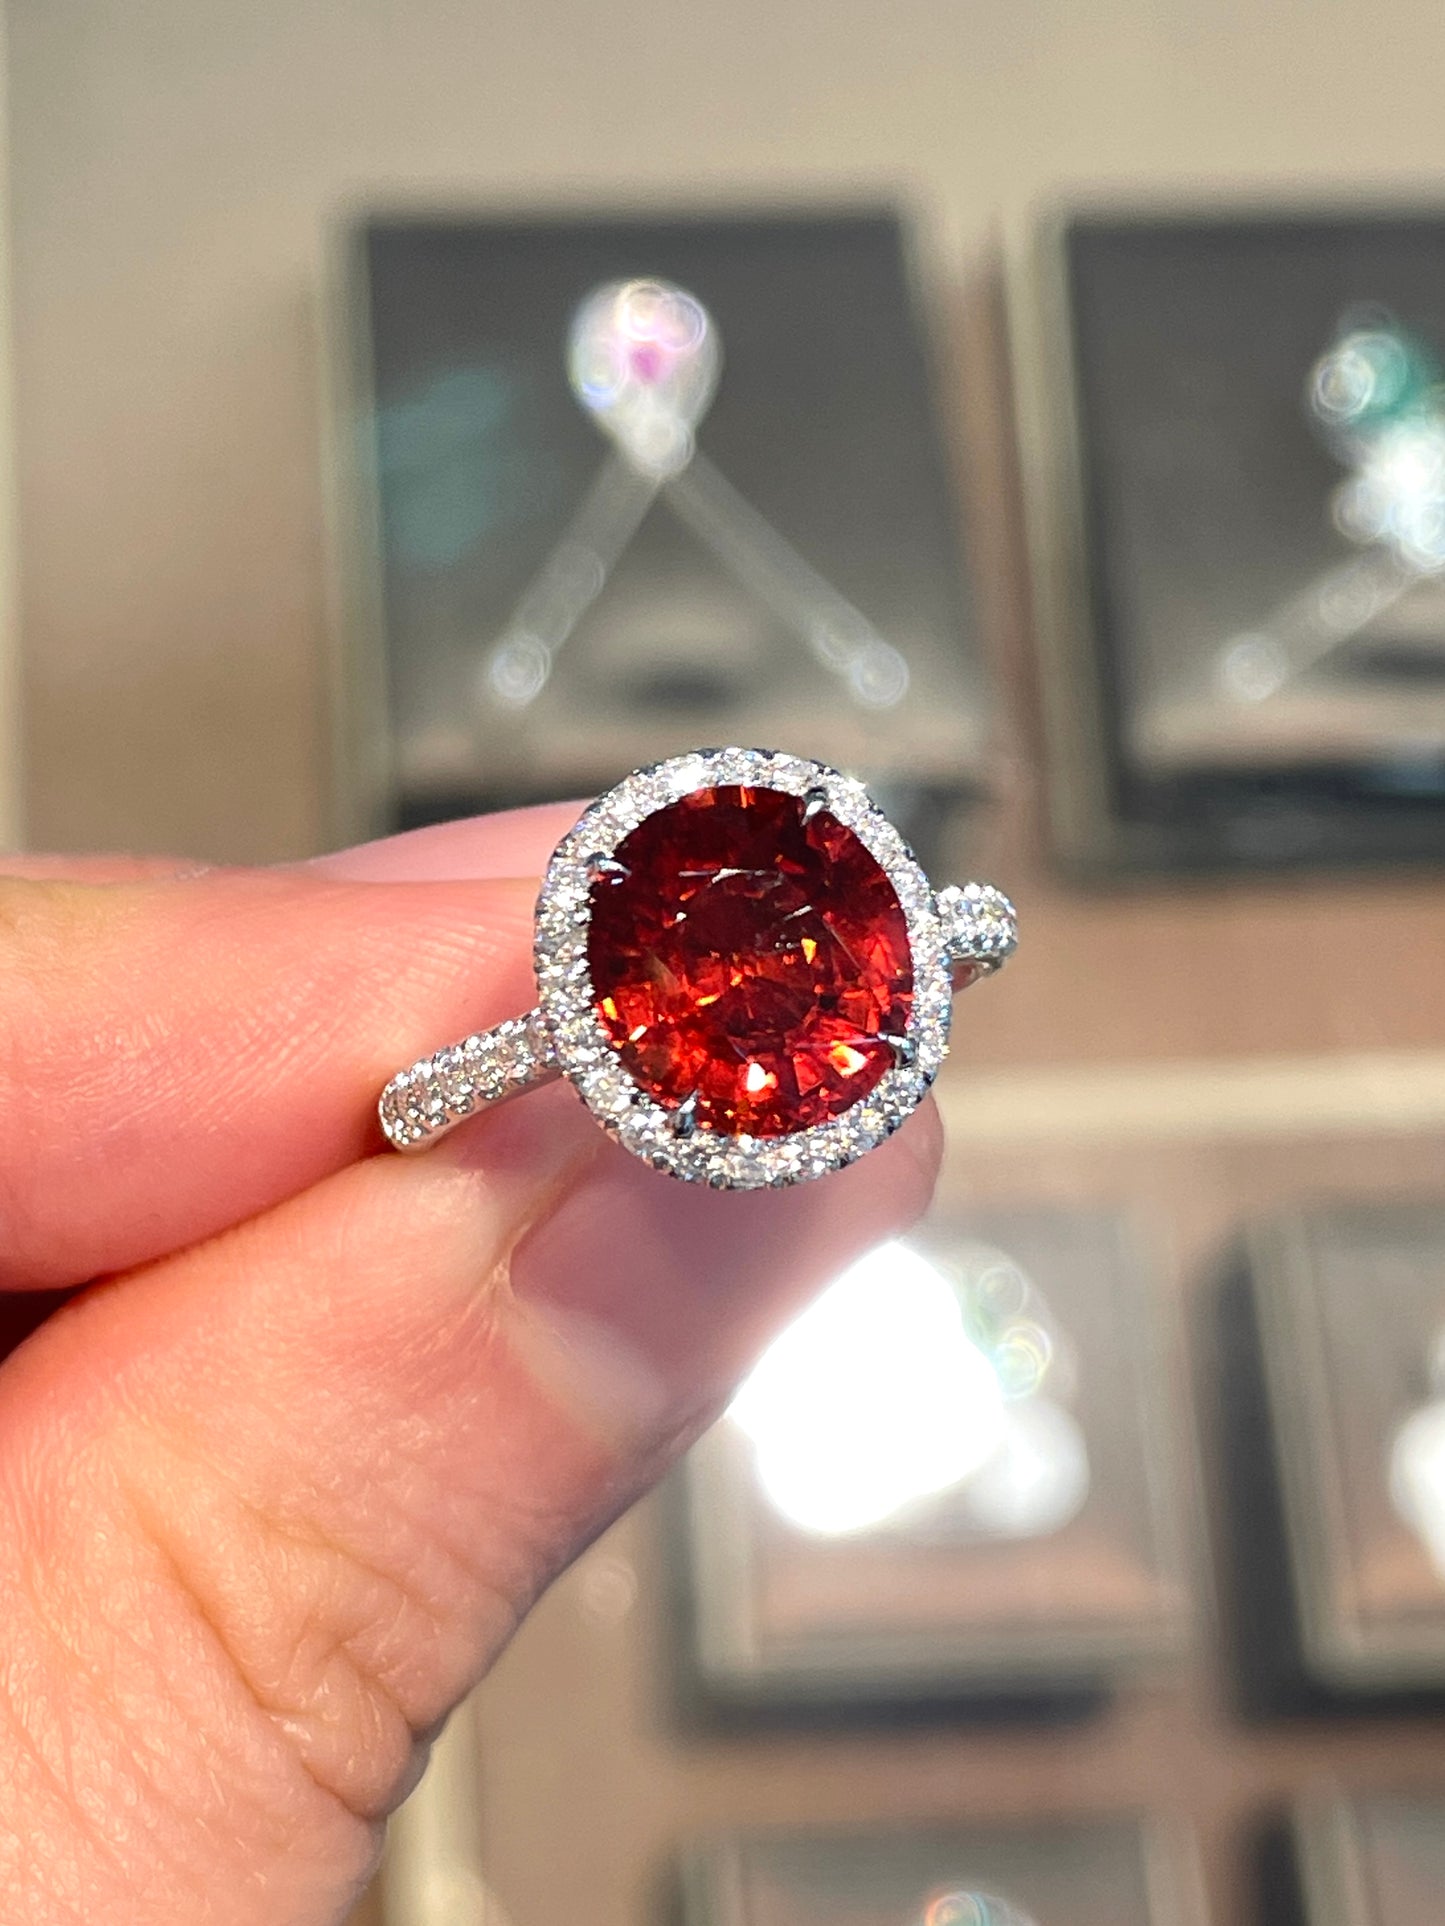 Natural Orangy Red Garnet 3.78ct Ring Set With Natural Diamonds in 18K White Gold Gemstone Fine Jewellery Singapore